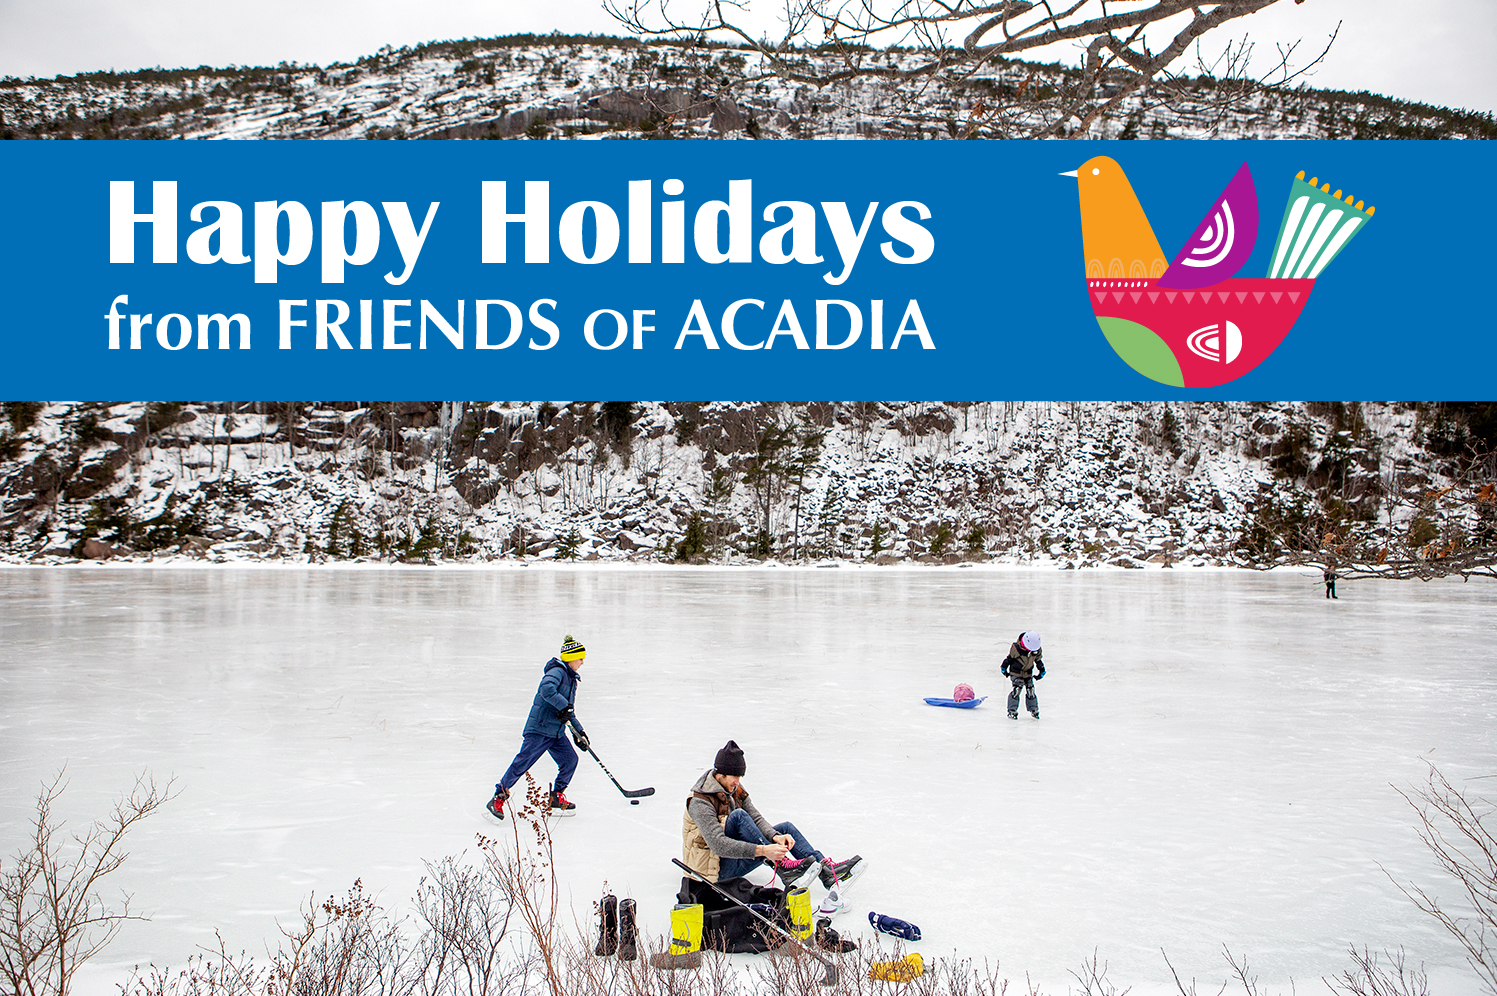 Happy Holidays from Friends of Acadia